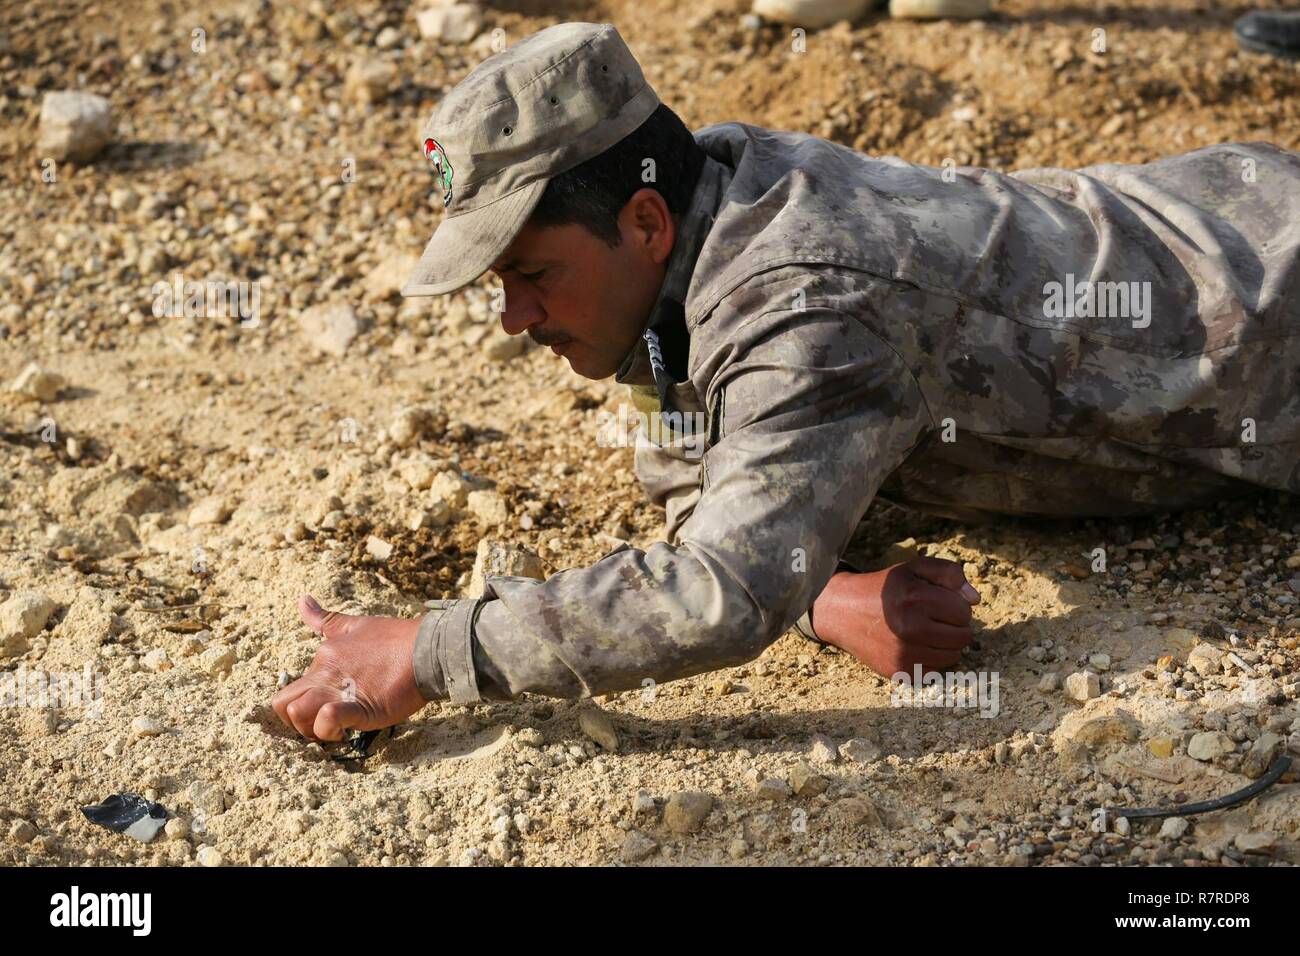 An Iraqi security forces soldier removes debris to search for a hidden simulated improvised explosive device during counter-IED training at Al Asad Air Base, Iraq, March 29, 2017.  This training is part of the overall Combined Joint Task Force – Operation Inherent Resolve building partner capacity mission by training and improving the capability of partnered forces fighting ISIS. CJTF- OIR is the global Coalition to defeat ISIS in Iraq and Syria. Stock Photo